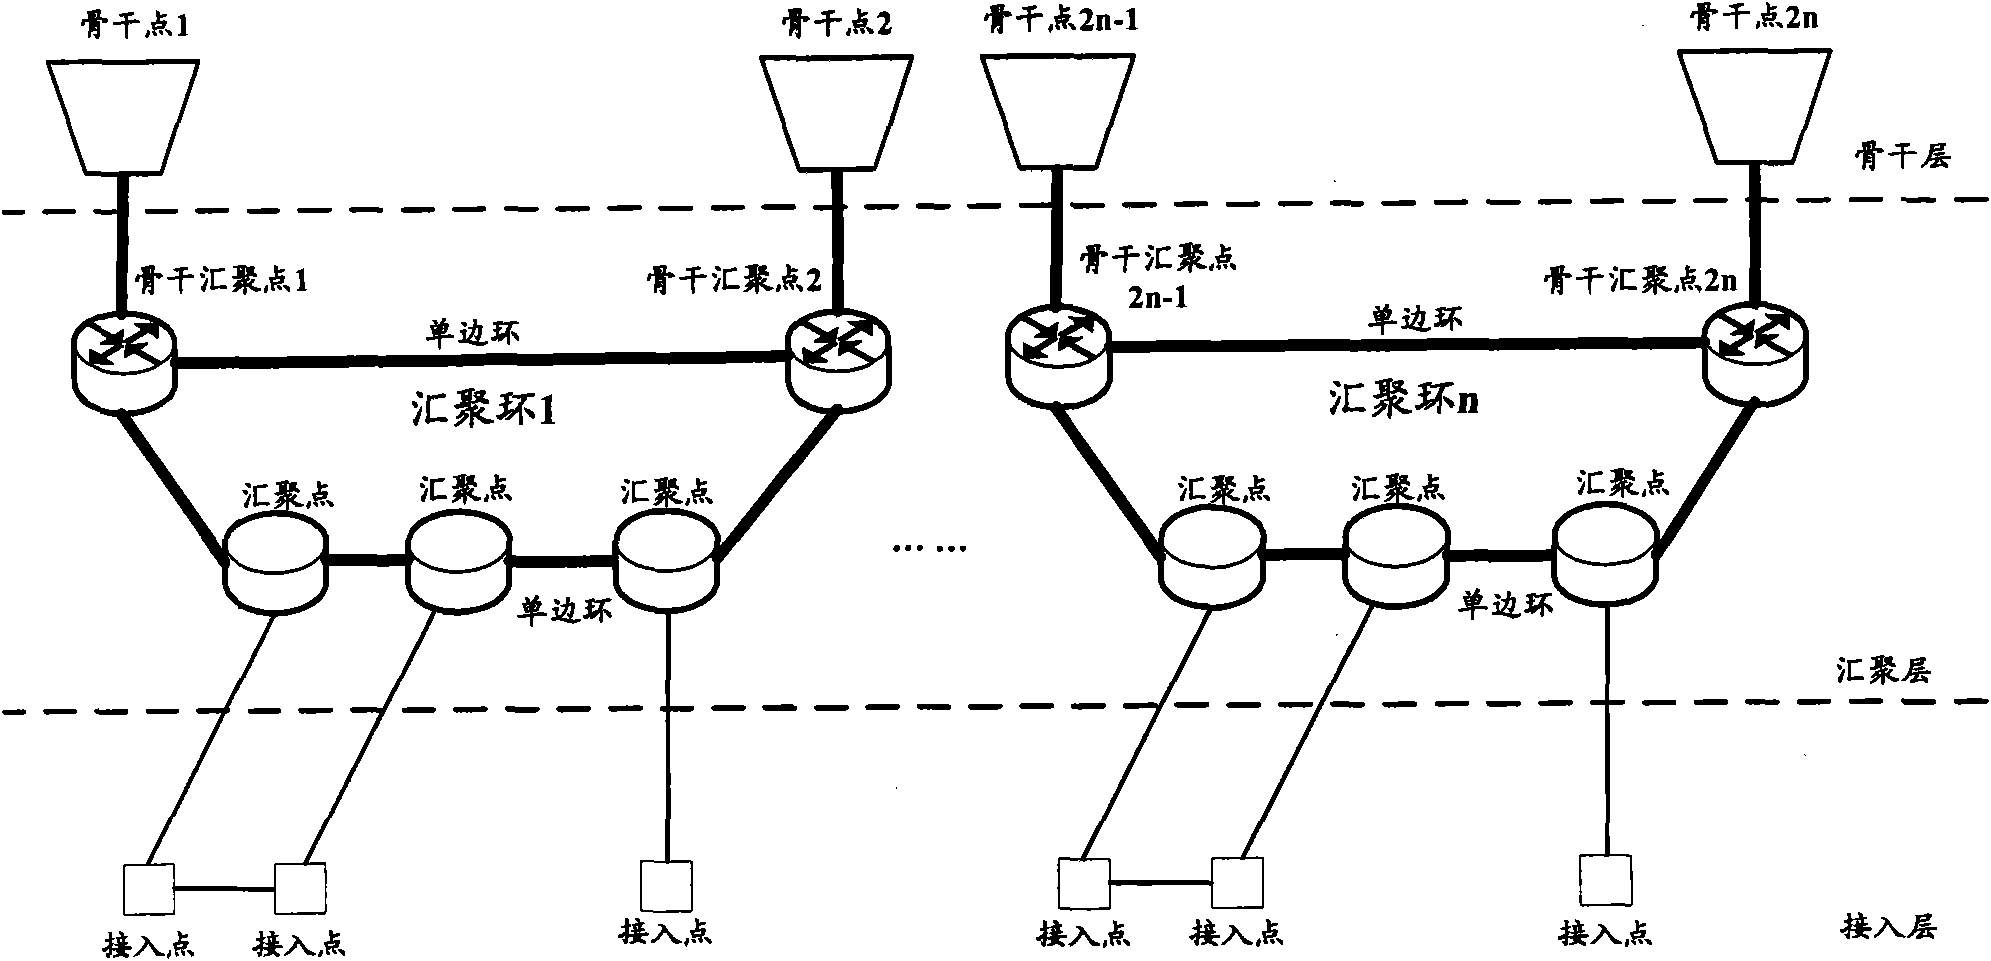 Multi-service transfer platform (MSTP) optical transport network, service transport method thereof and related equipment